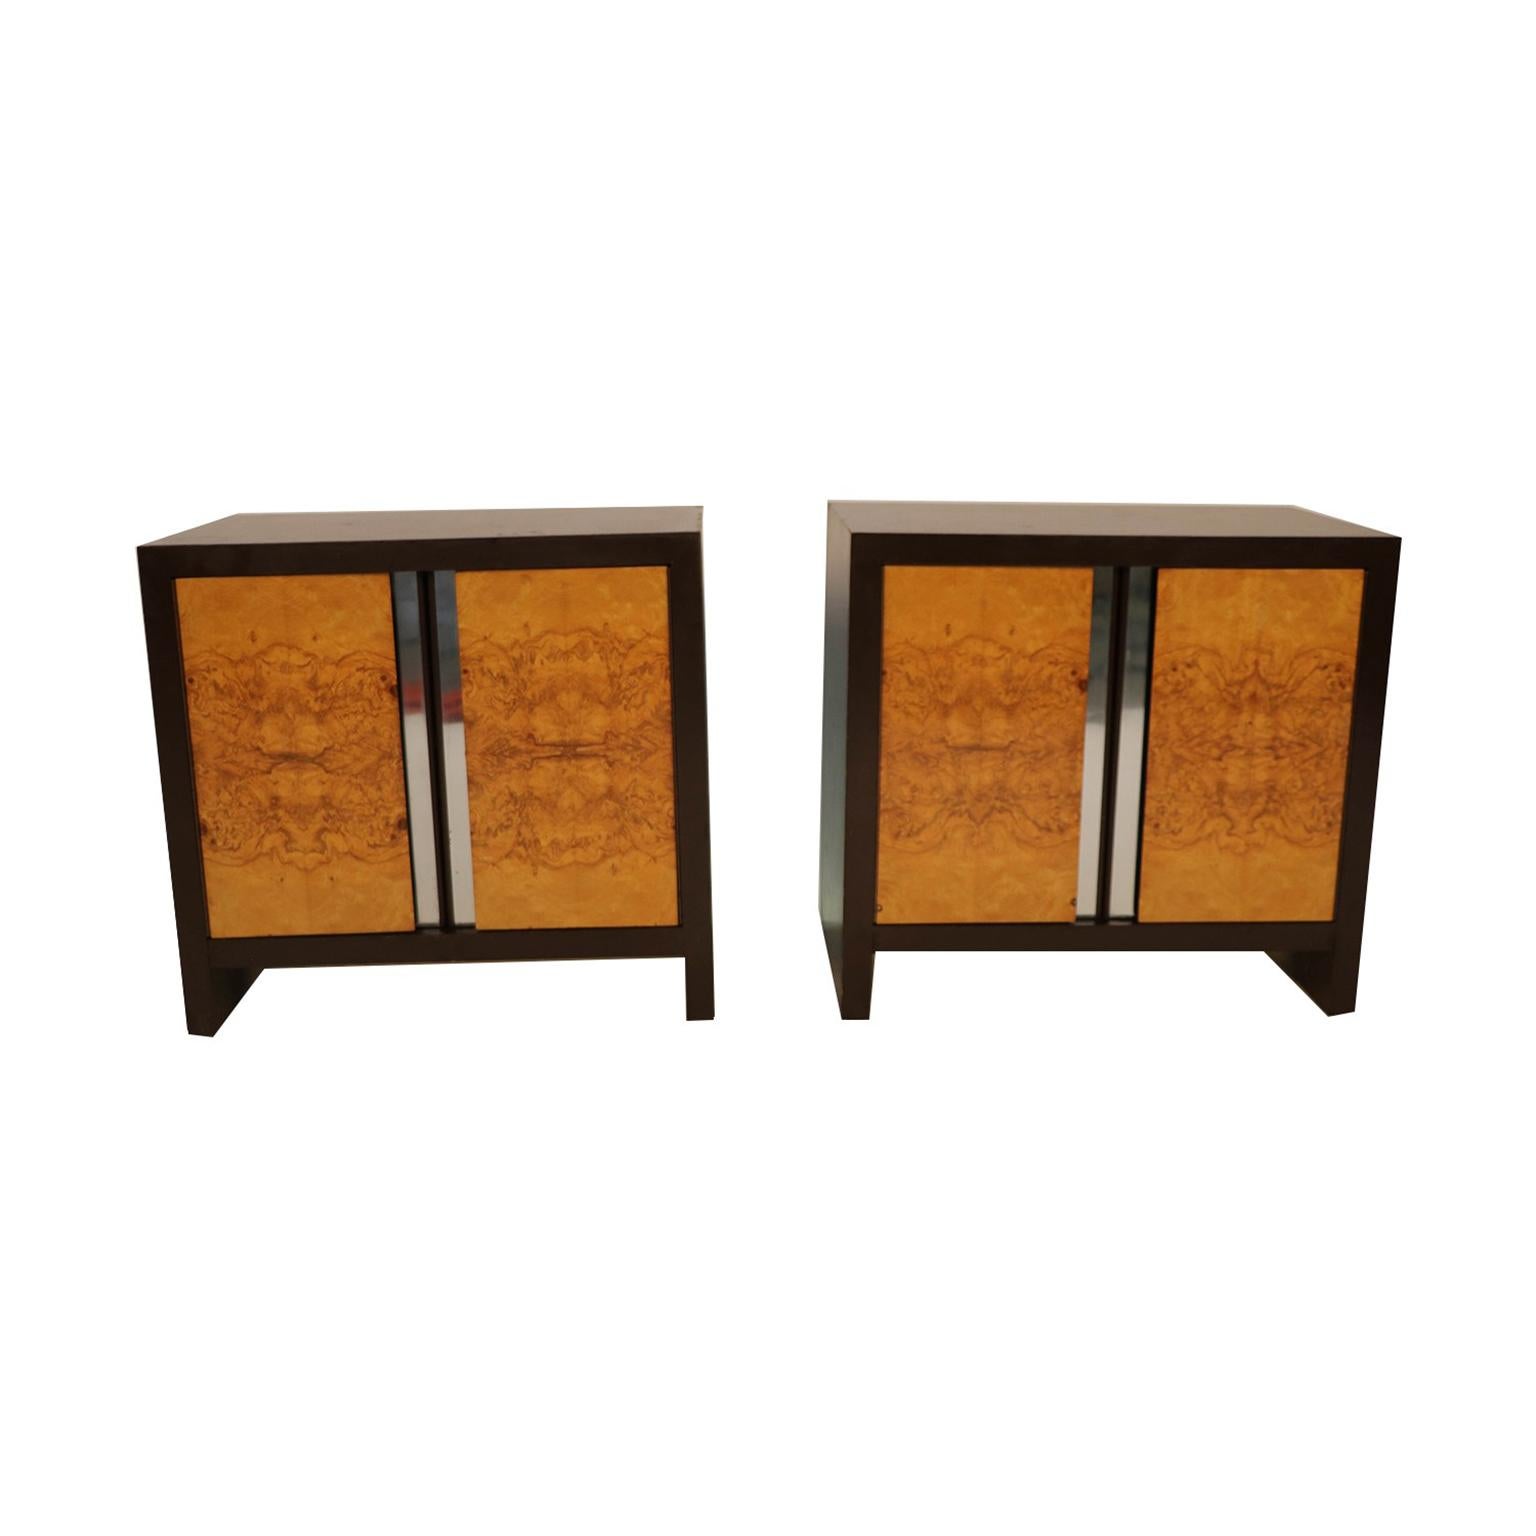 Handsome, richly grained burl wood, ebony, Mid-Century Modern, nightstands or end tables, attributed to Milo Baughman. Expertly crafted, these absolute jewels remain in clean vintage condition. Each features an ebonized wood frame with a square top,